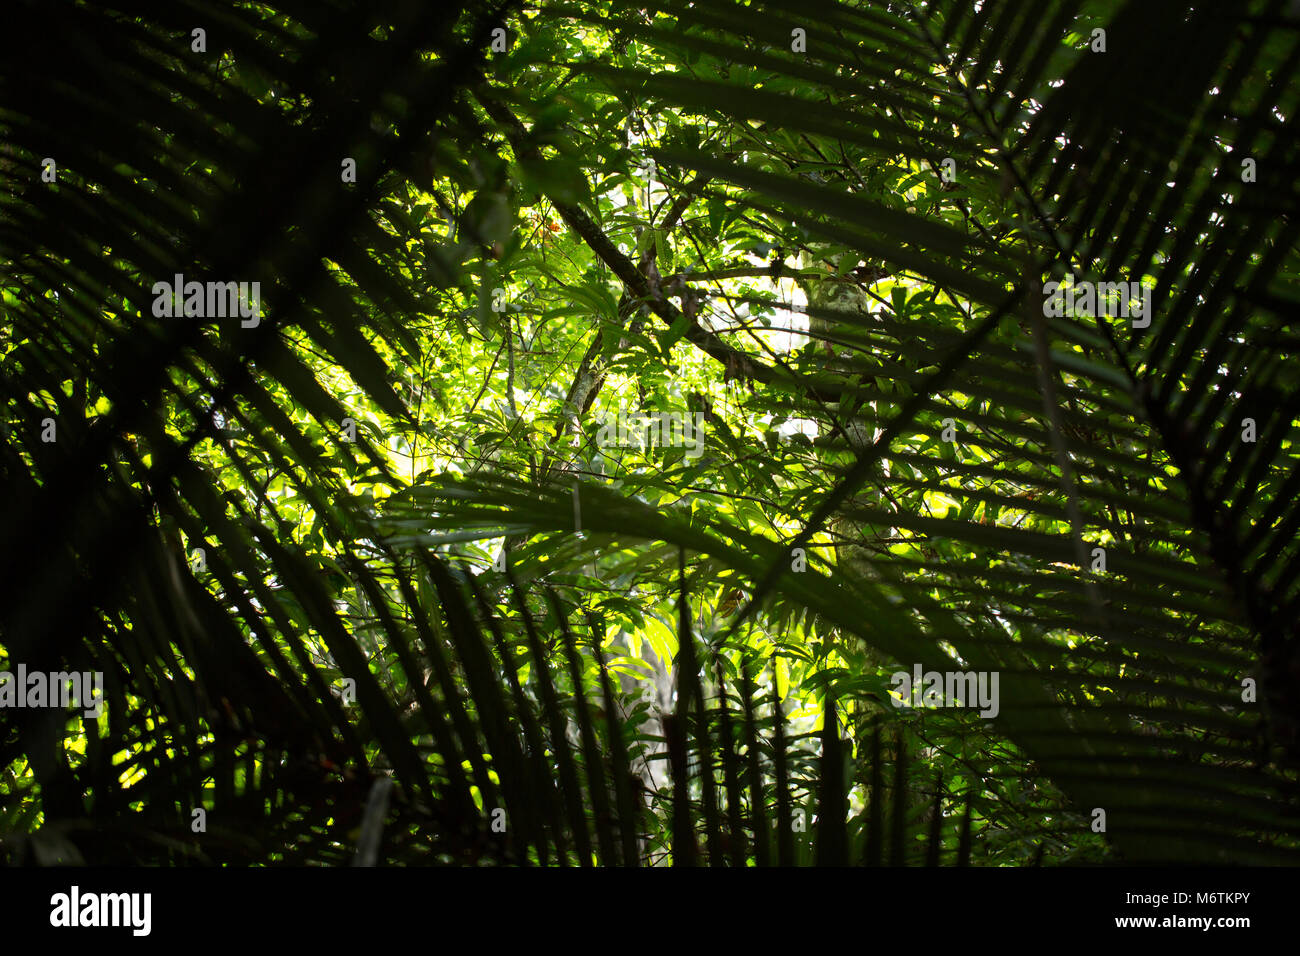 Ferns growing in the understory of the rainforest, Suriname, South America Stock Photo